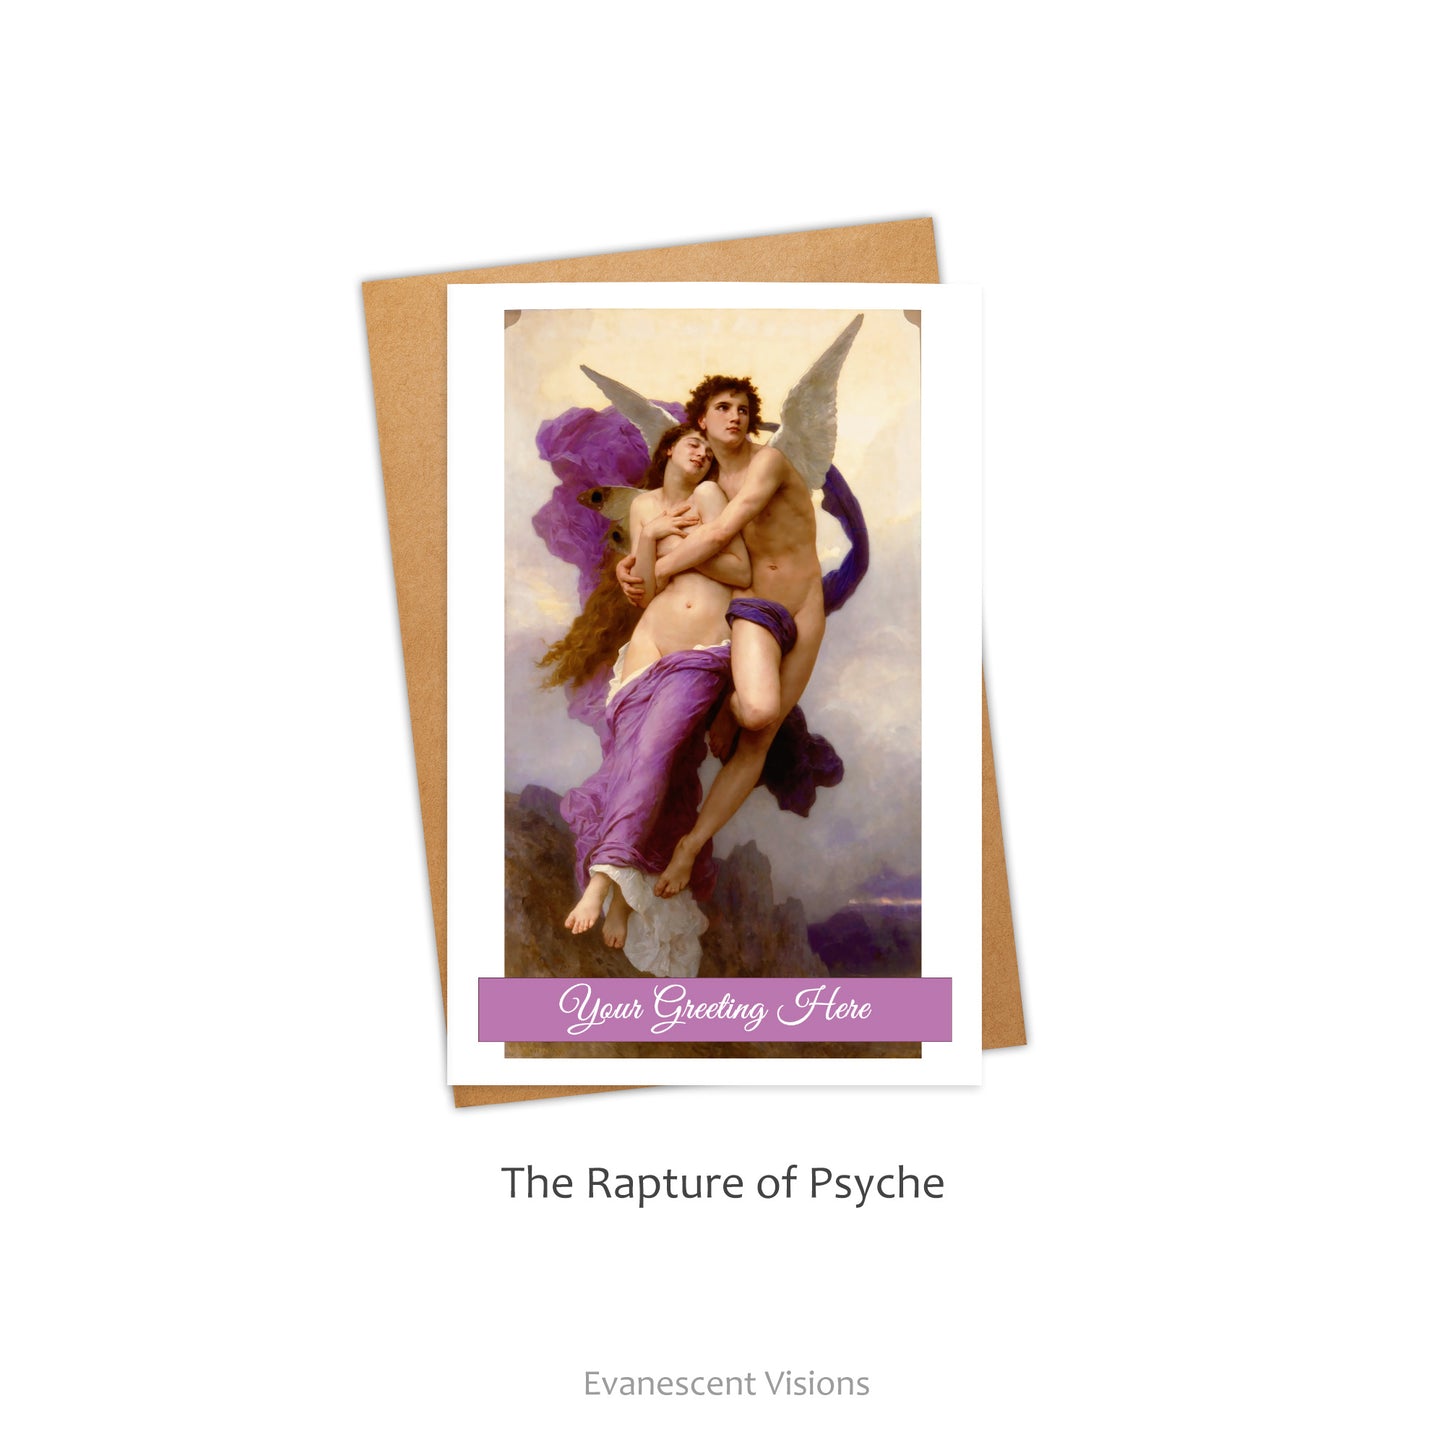 Card and envelope with personalised front greeting. Card shows image from 'The Rapture of Psyche' by William-Adolphe Bouguereau.